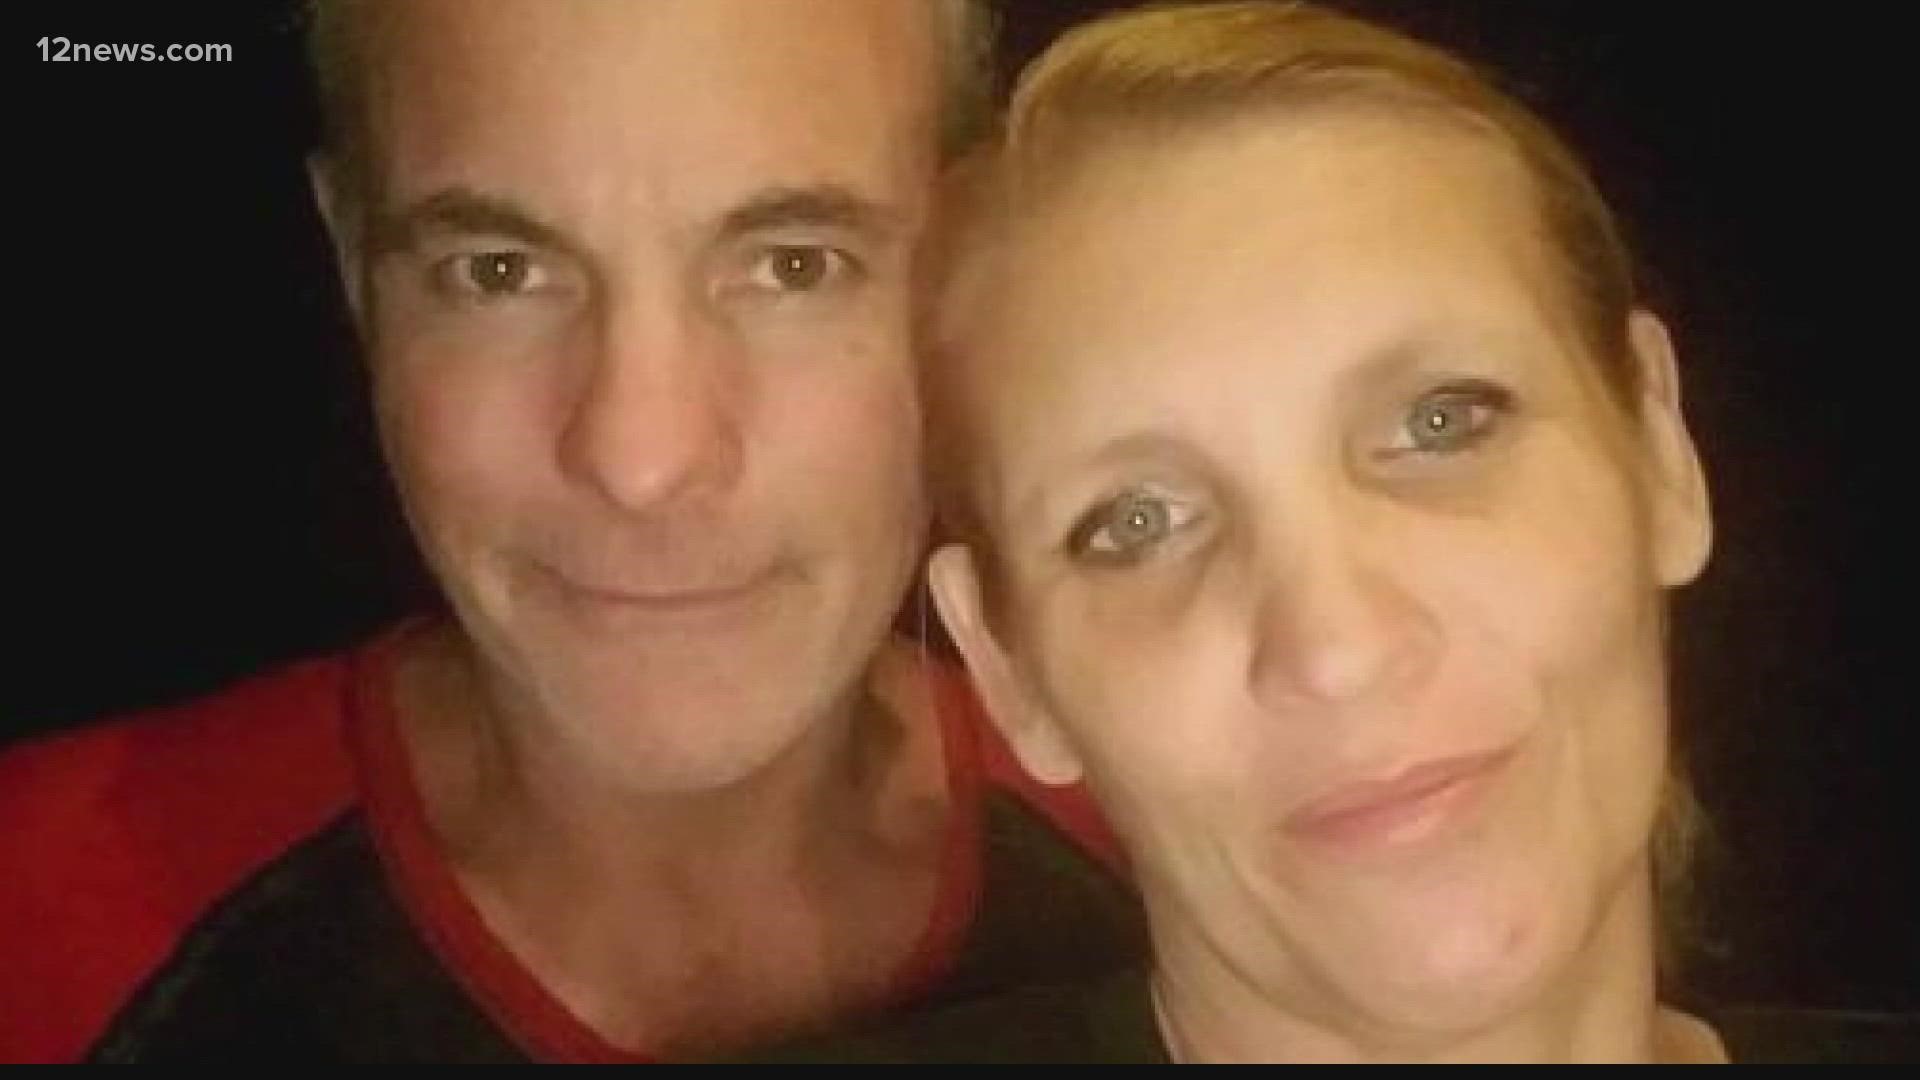 Pamela Cooper, a 911 operator who died in March, should have been sent home after telling her boss she felt sick, a city investigation has found.